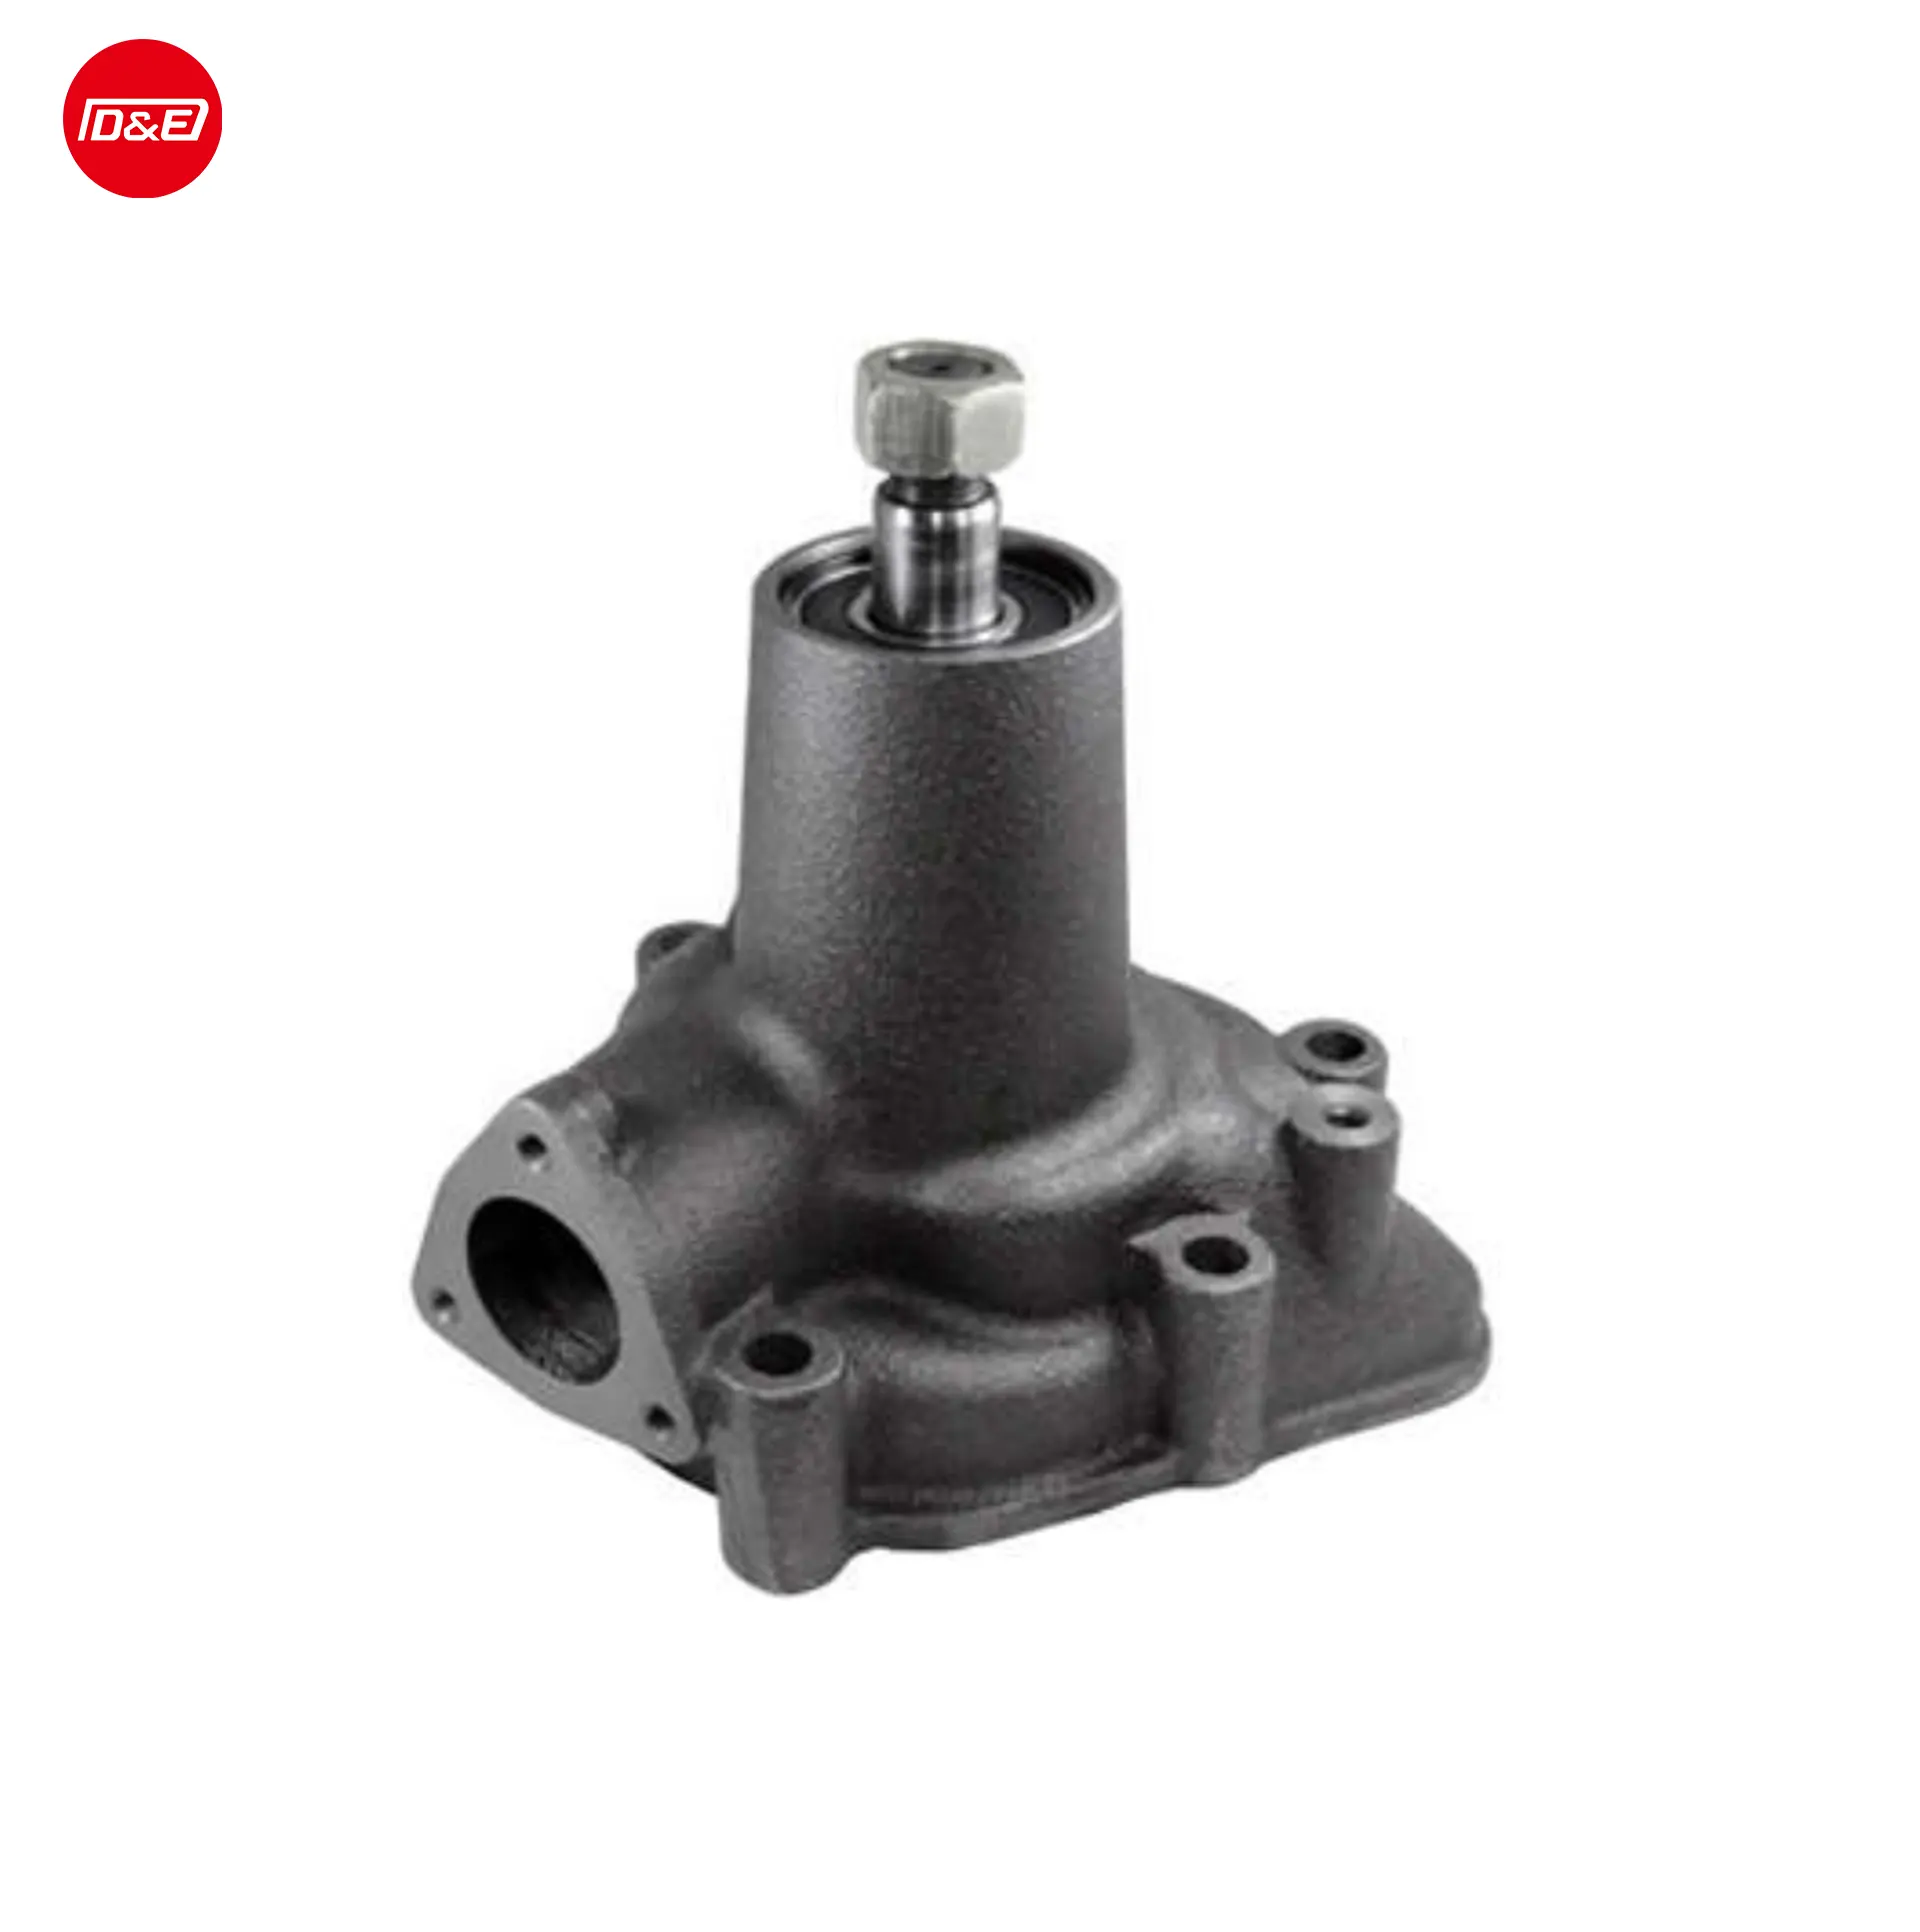 OE 1672680 524866 Auto Water Pump Truck for Scania with High Quality Coolant Pump For FH FM FMX NH Trucks